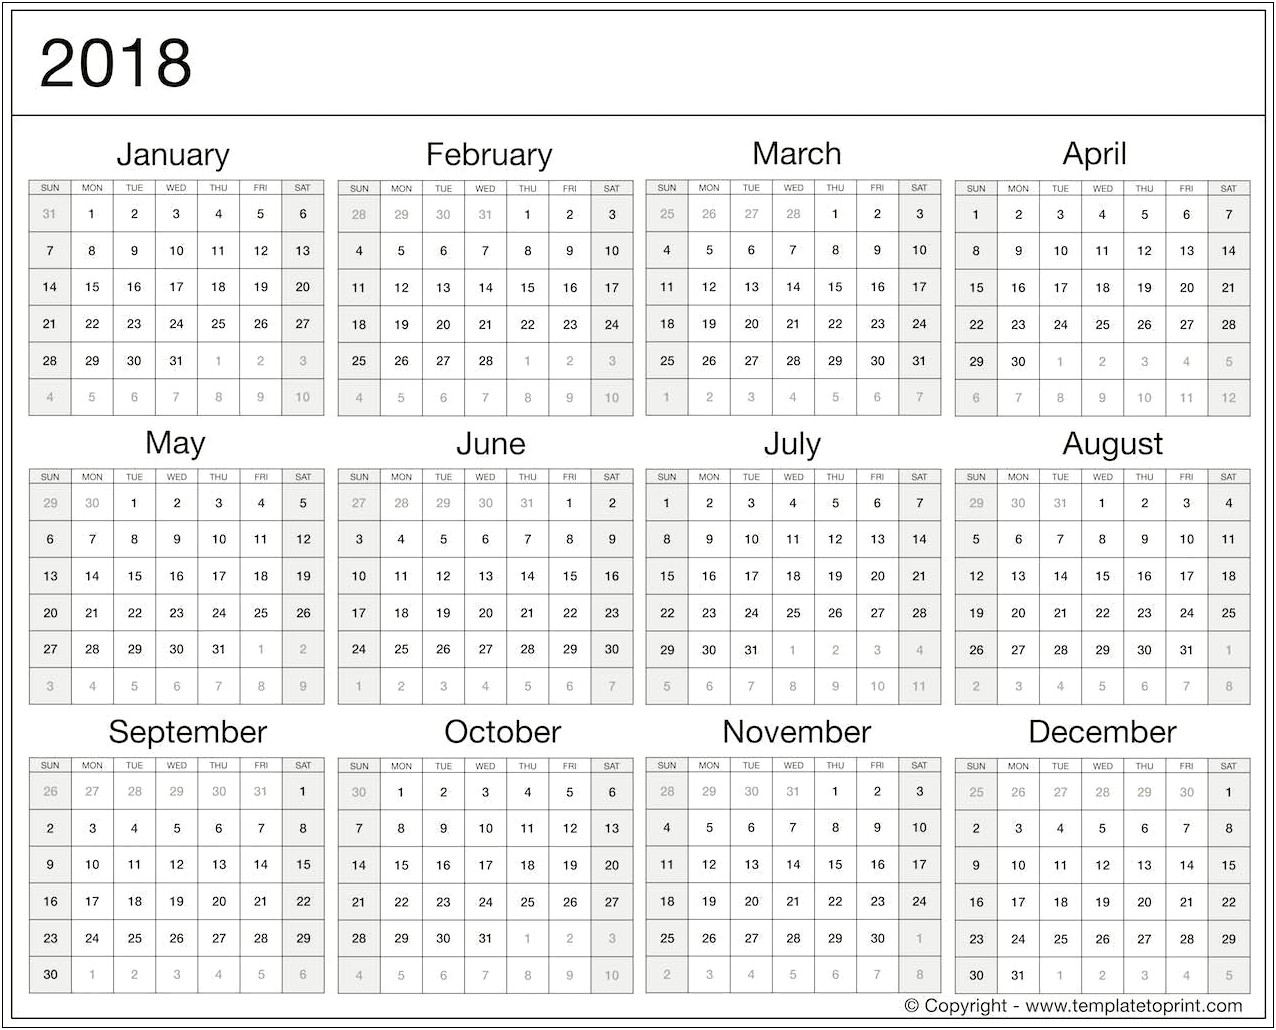 2018 Yearly Calendar Template Word With Holidays